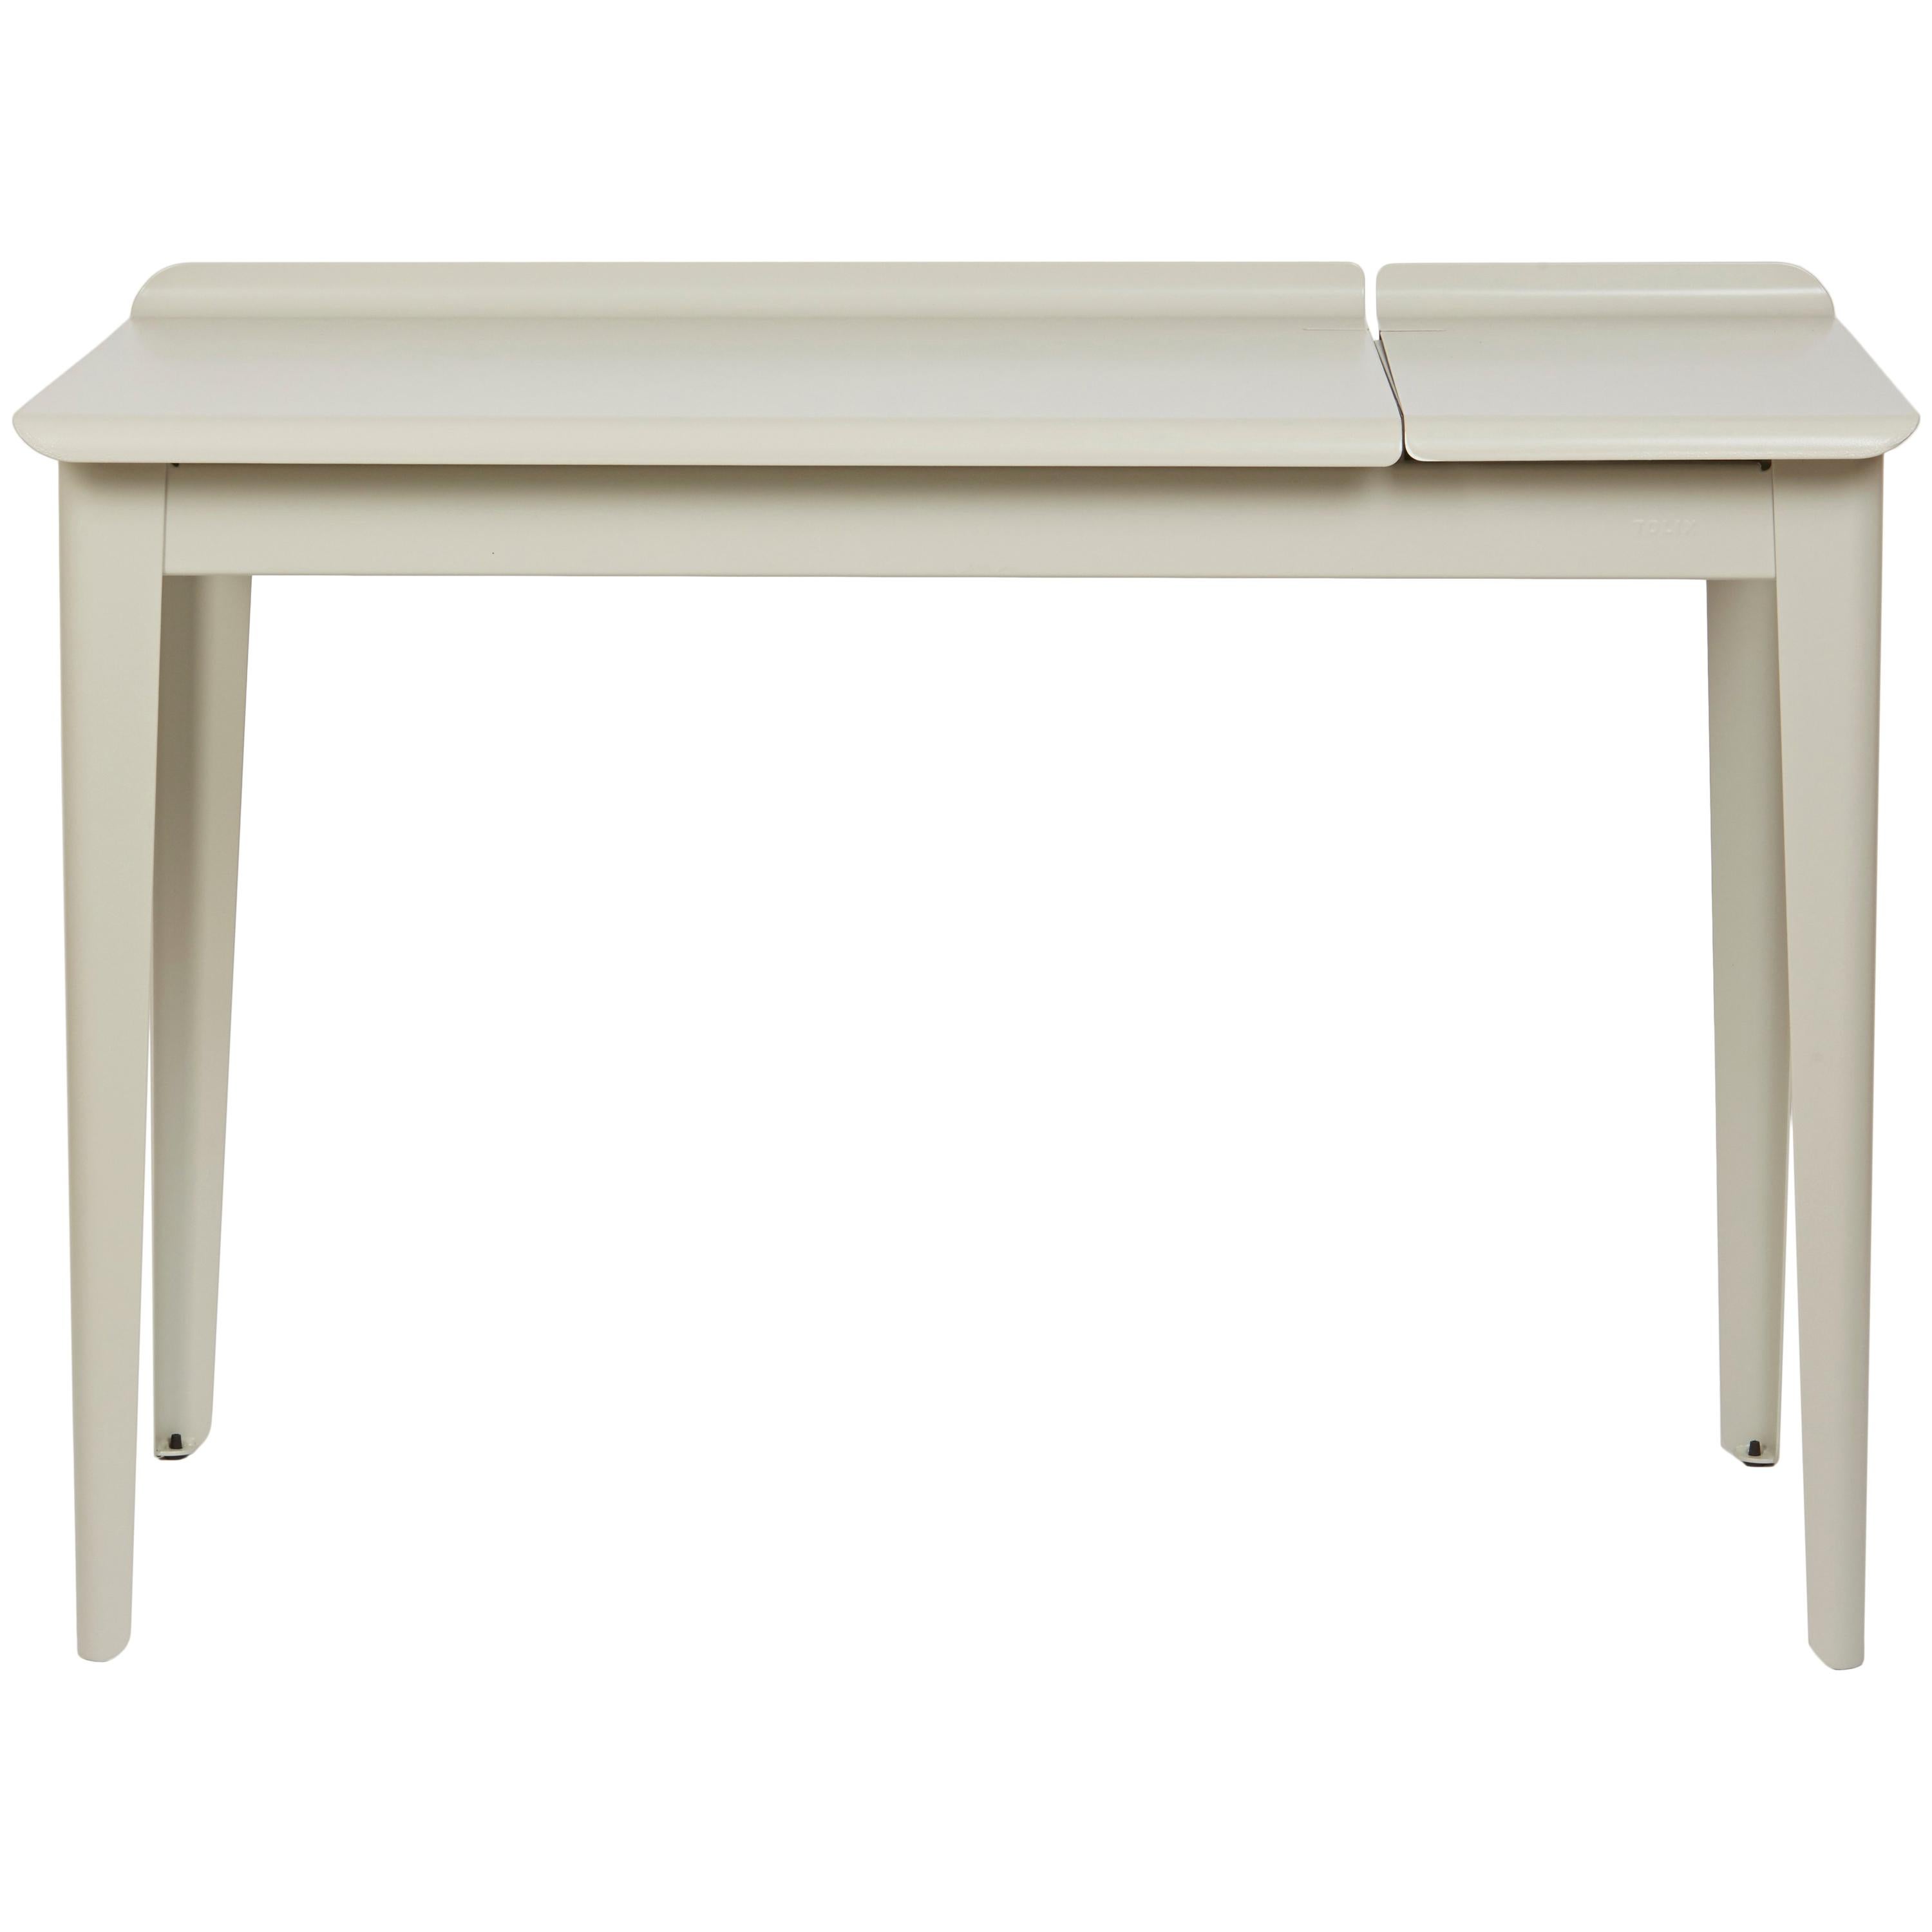 For Sale: White (Ivoire) Flap Desk 57x105 in Essential Colors by Tolix